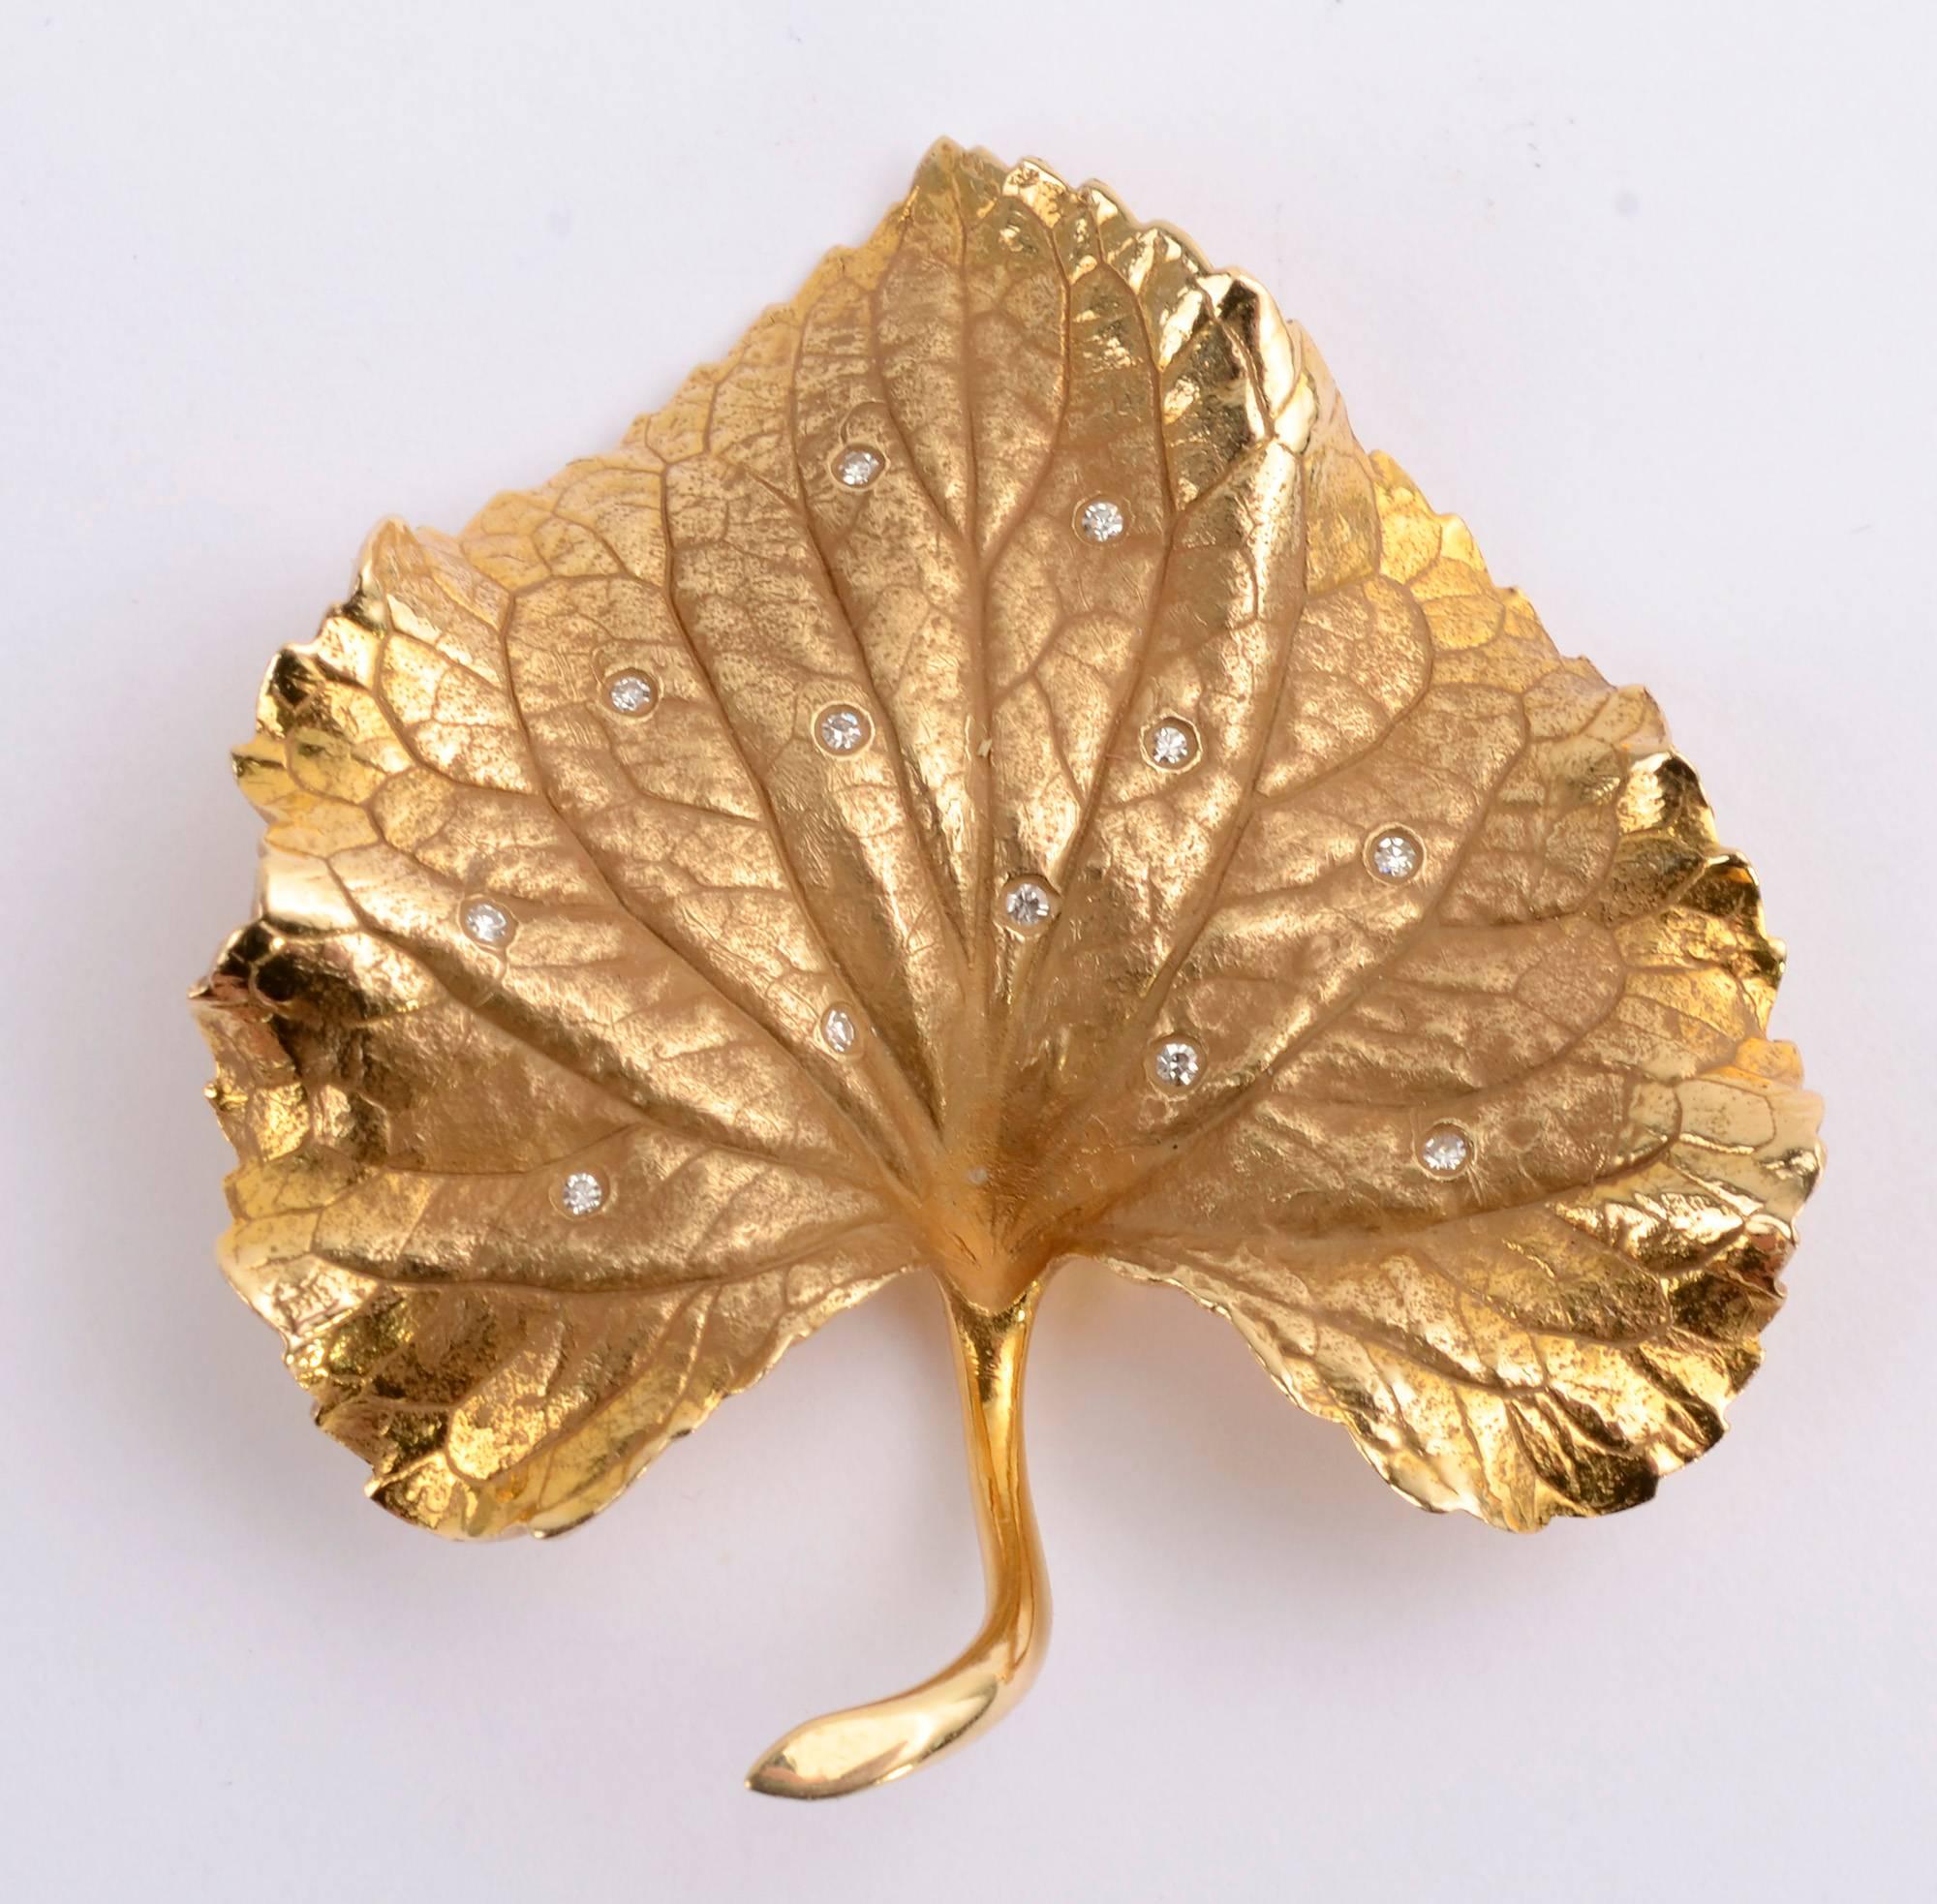 Finely made brooch depicting a Violet leaf. It is quite realistic in texture and undulation. It is highlighted with 12 small diamonds for a hint of sparkle. Measurements are 1 9/16